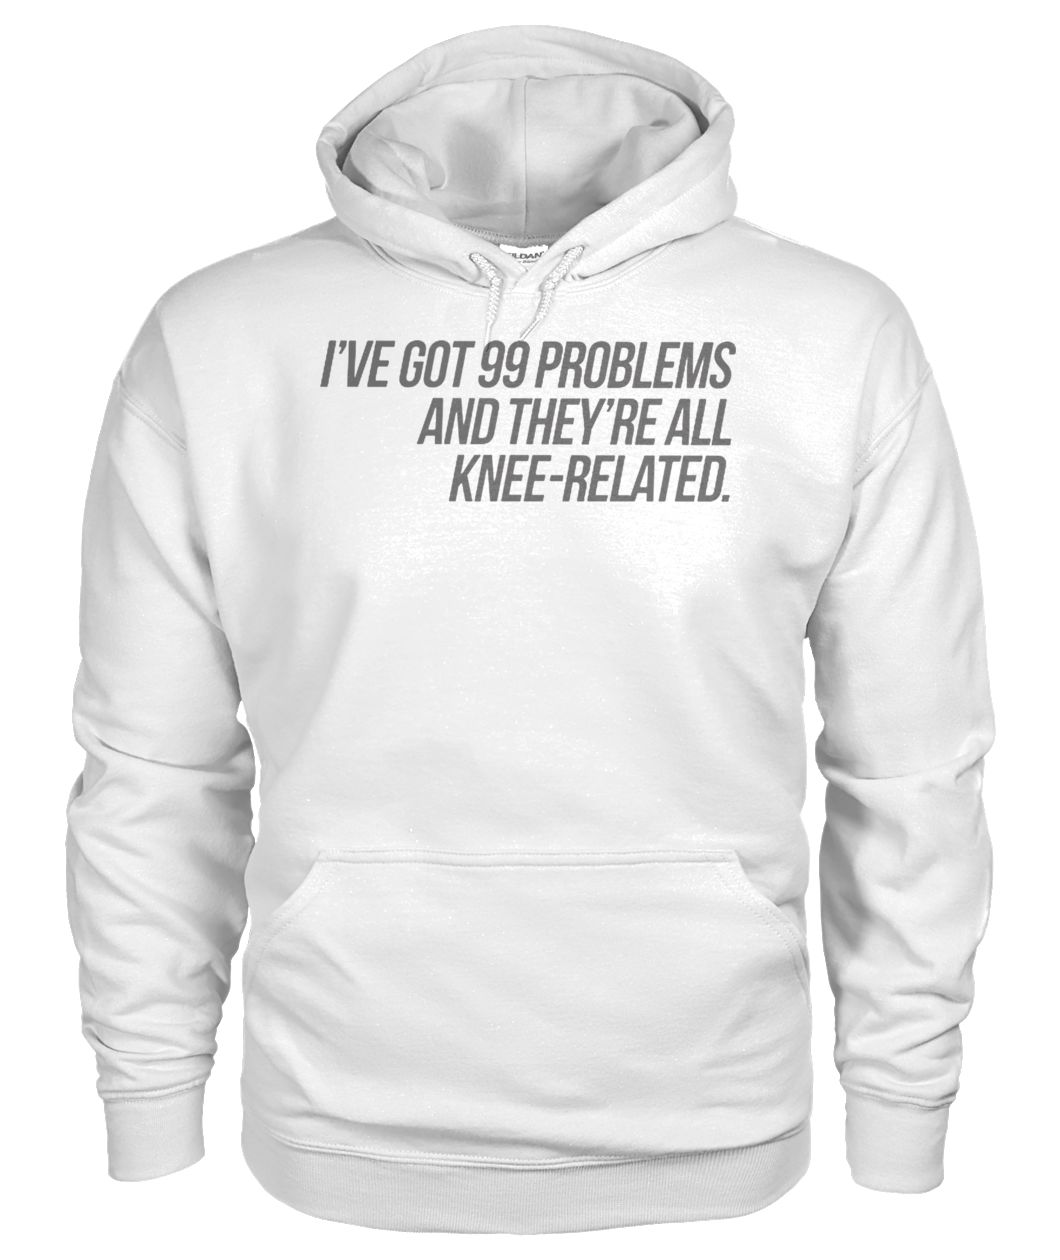 I've got 99 problems and they're all knee-related gildan hoodie